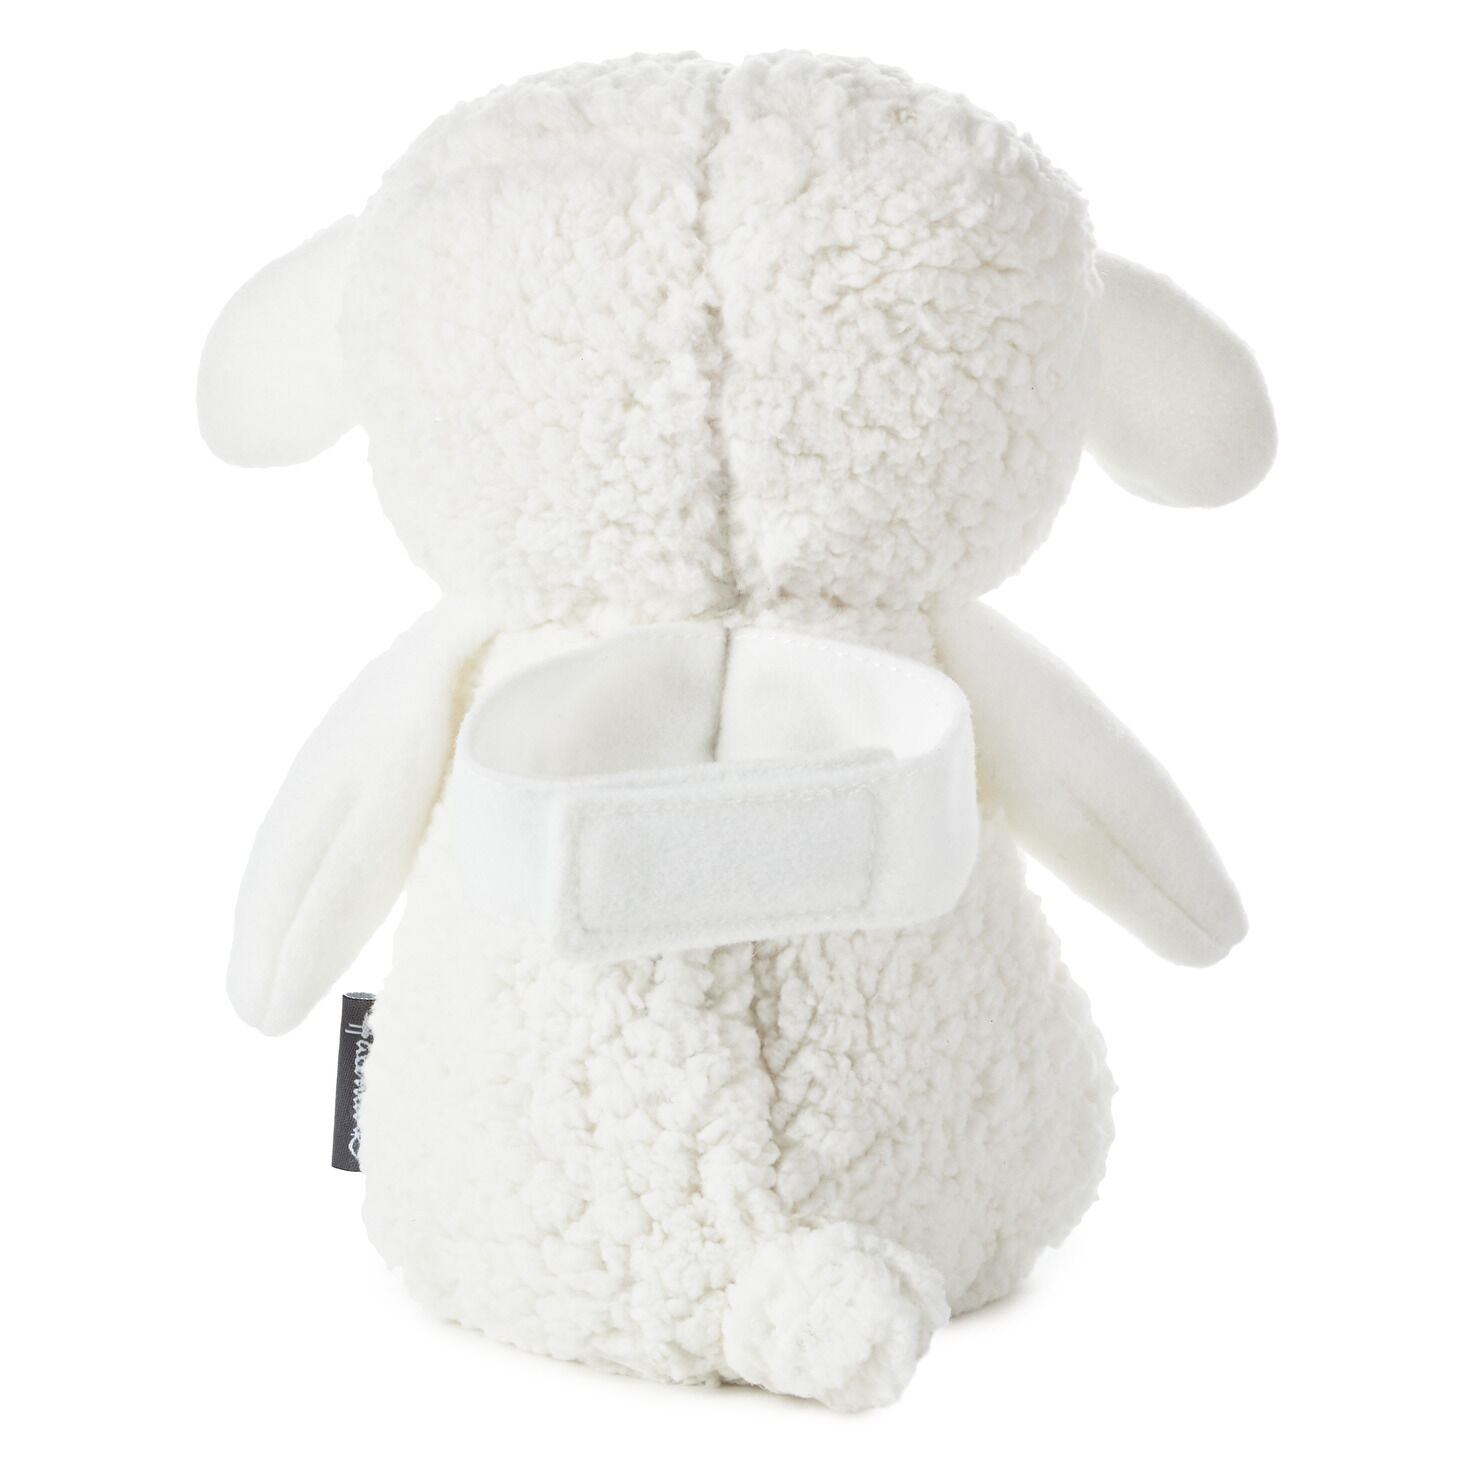 Lullaby Lamb Musical Stuffed Animal, 8.25" for only USD 29.99 | Hallmark